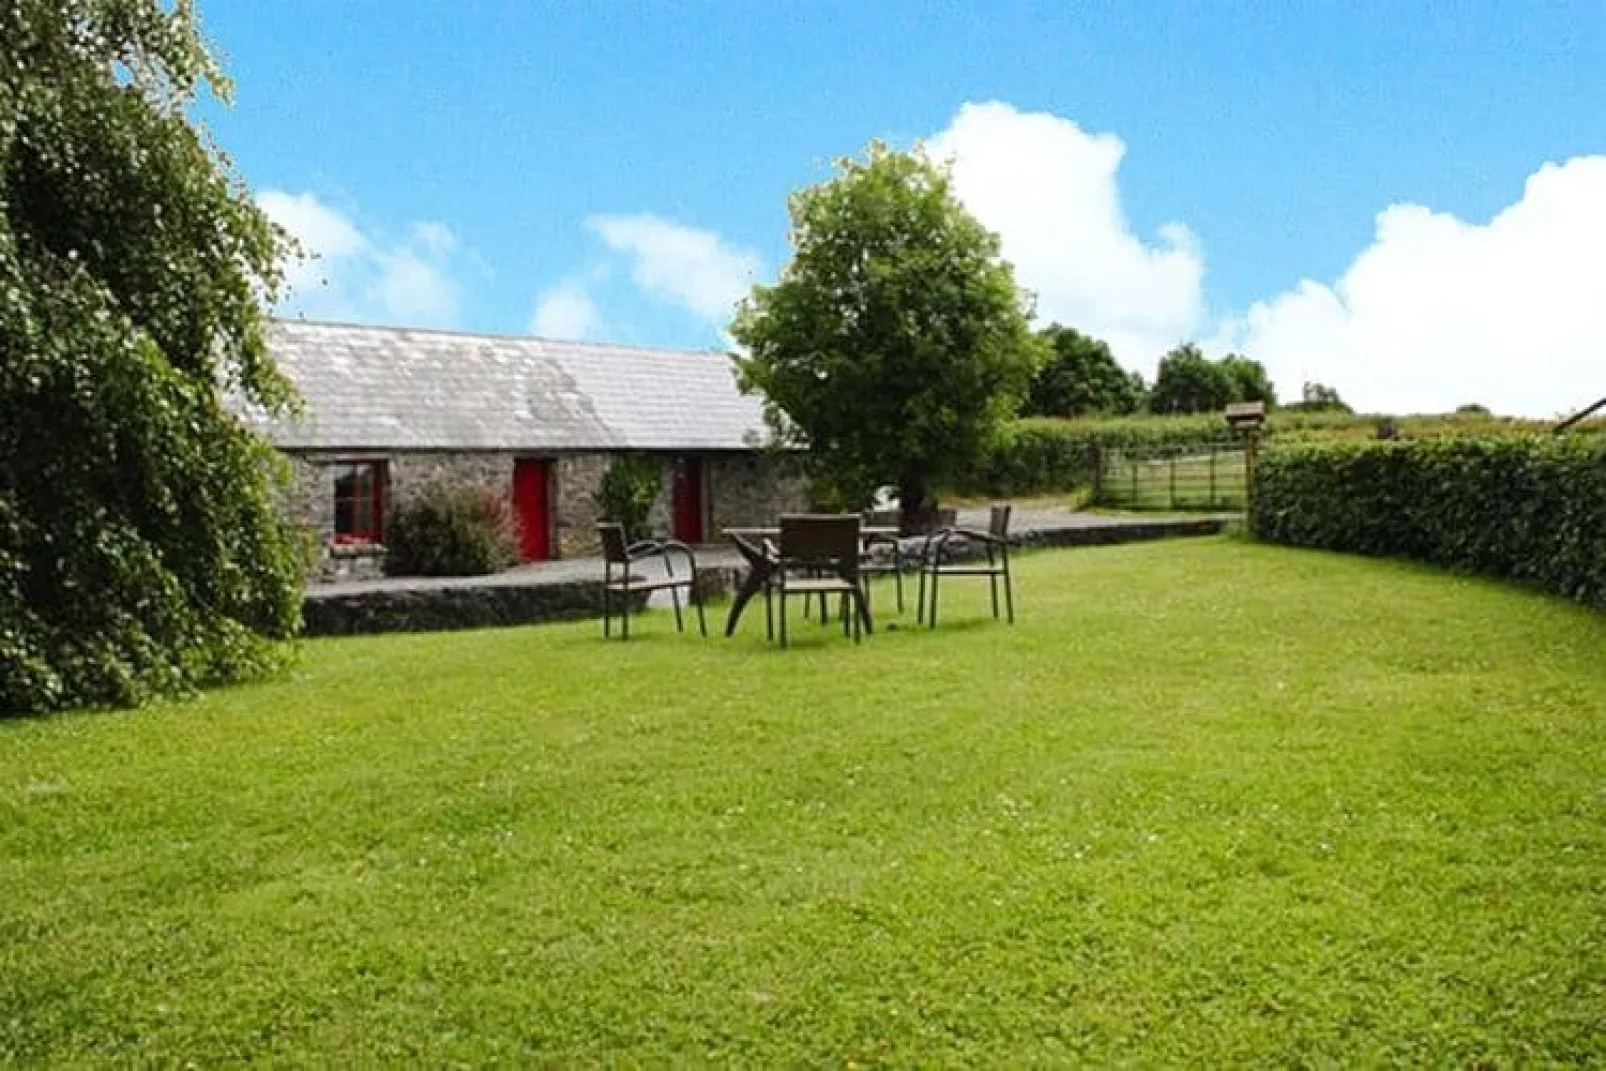 Lime Kiln Cottage Terryglass Co Tipperary-Tuinen zomer